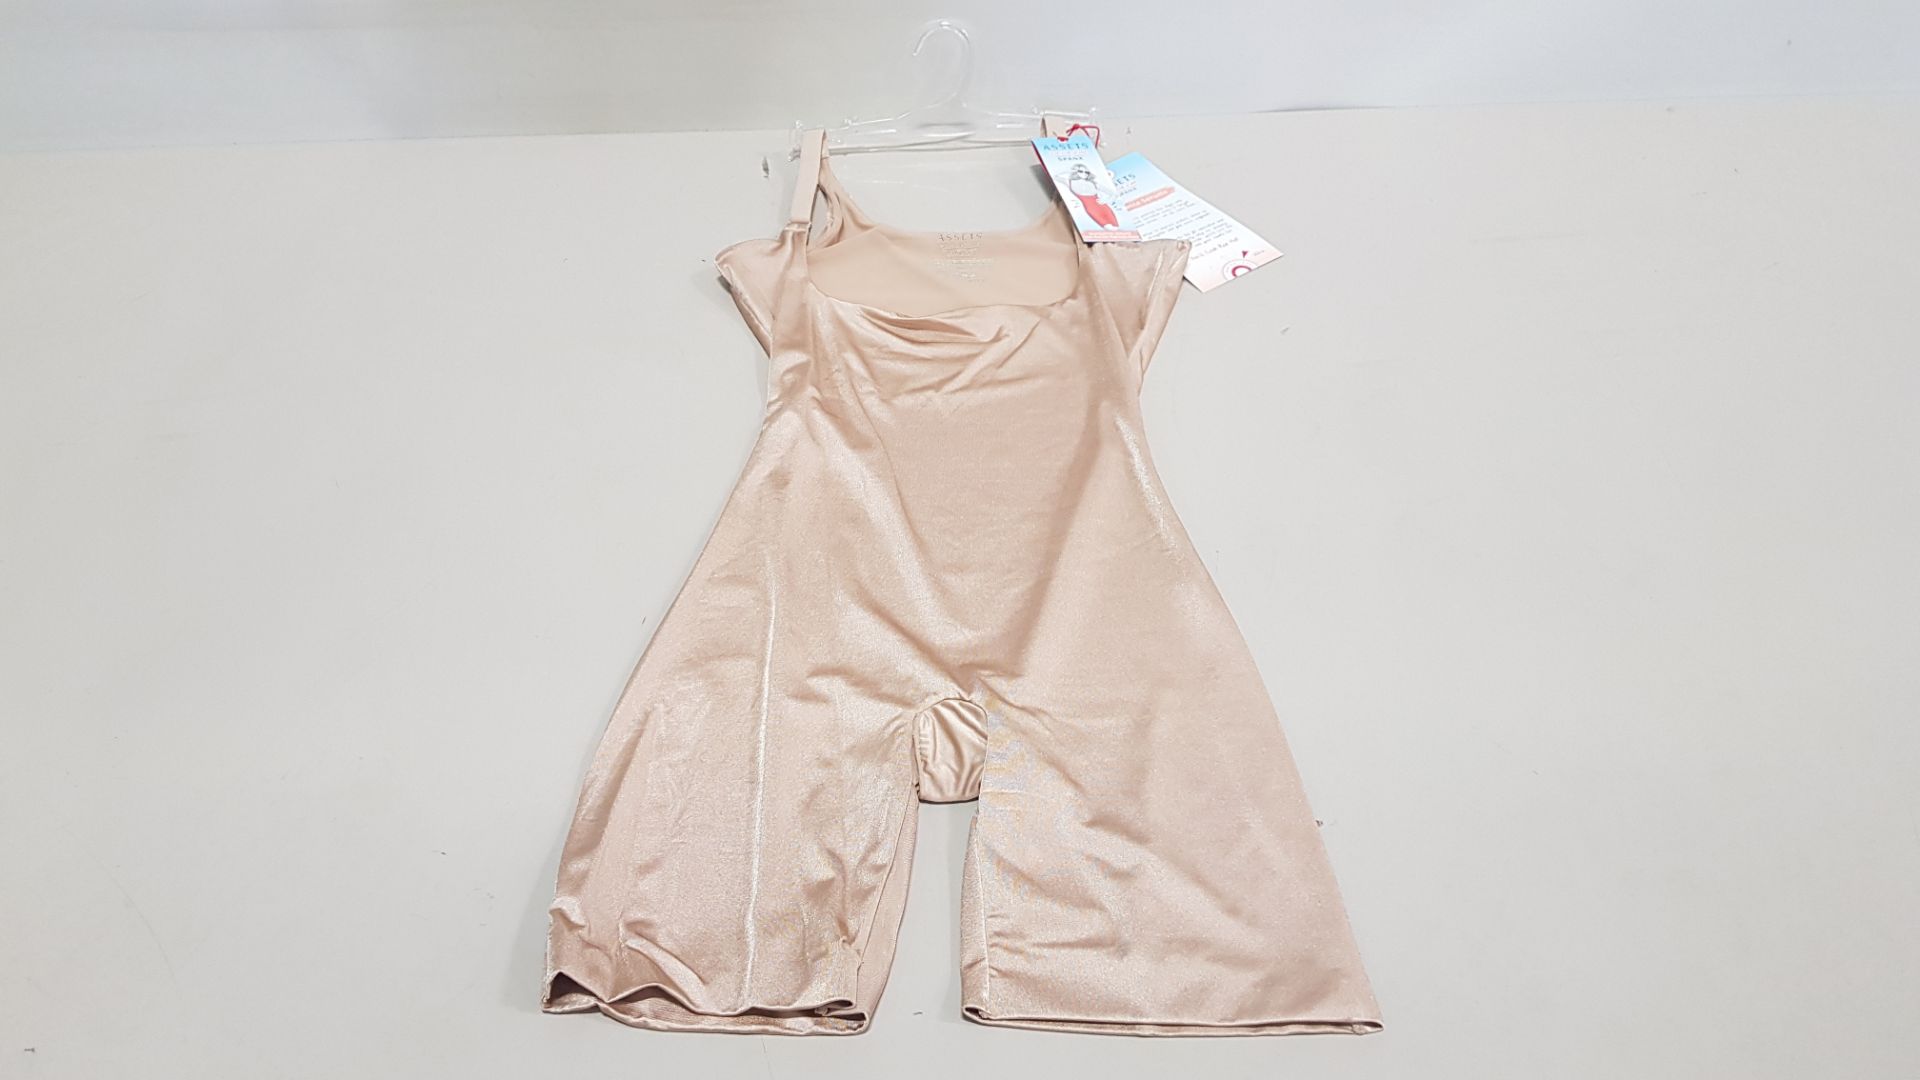 20 X BRAND NEW SPANX NUDE OPEN BUST MID THIGH BODY SHAPER SIZE LARGE